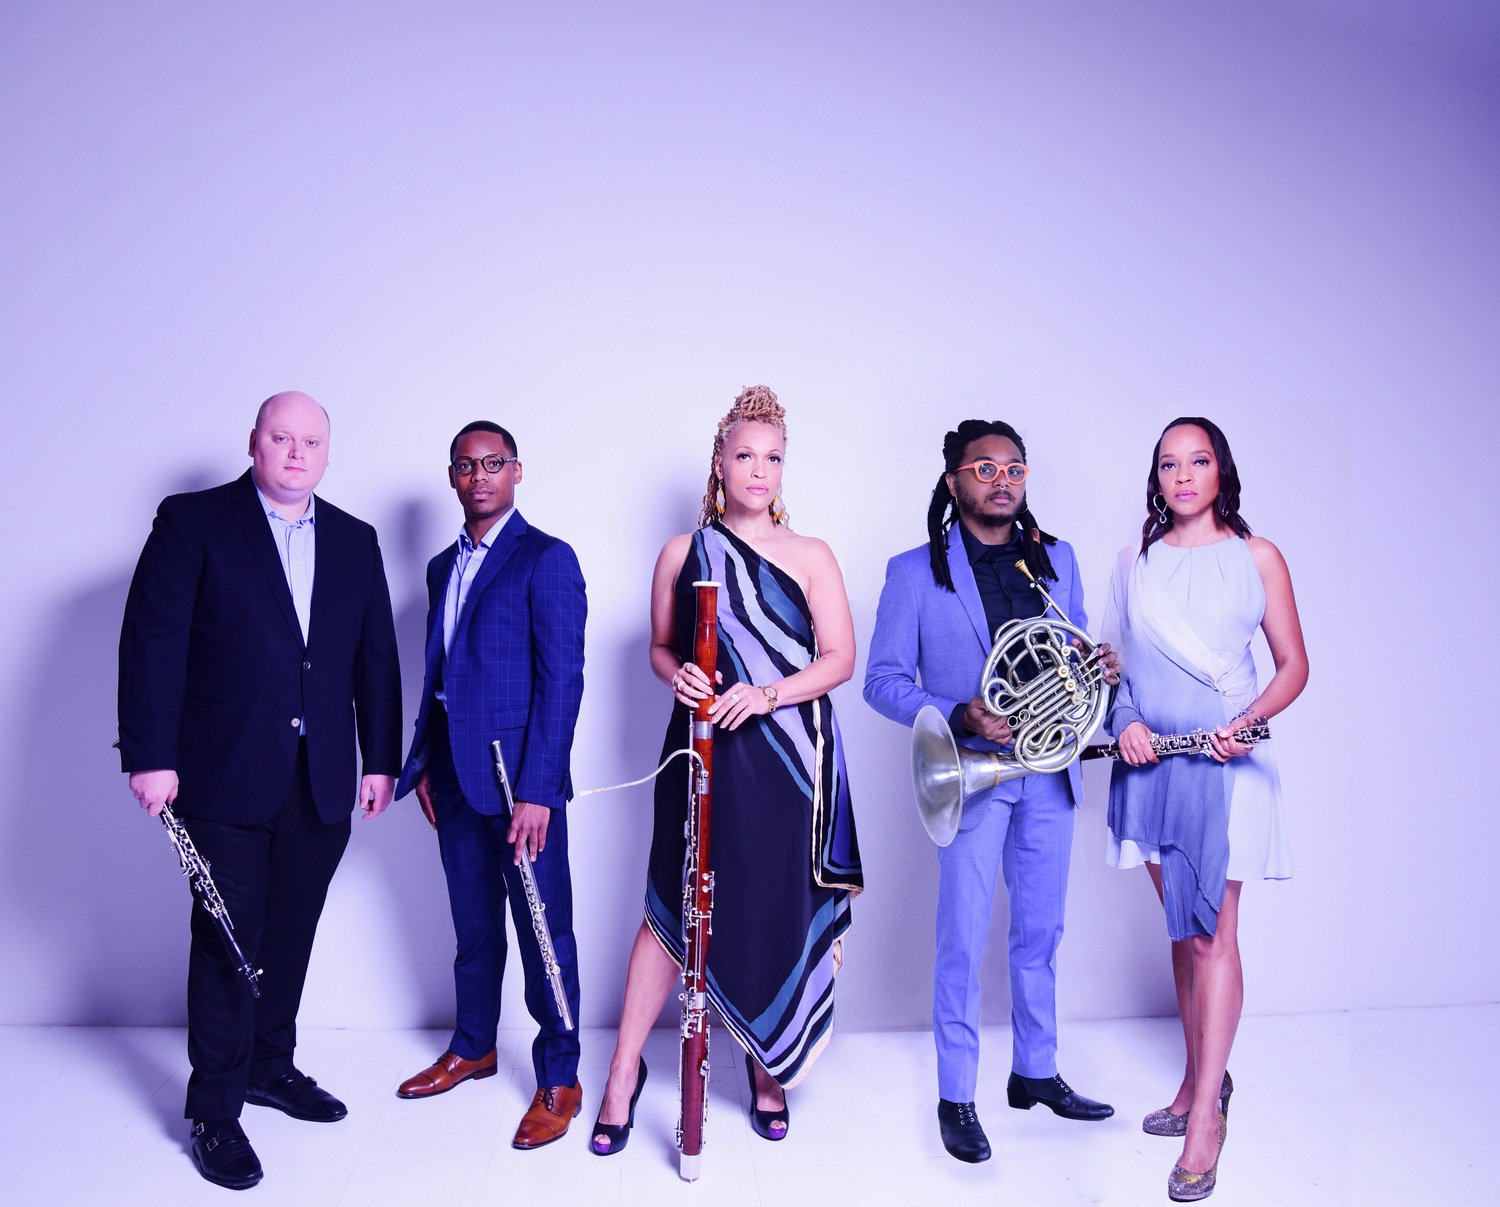 Grammy Award-winning Imani Winds perform on Shelter Island on April 6 in a concert presented by Shelter Island Friends of Music. SHERVIN LAINEZ